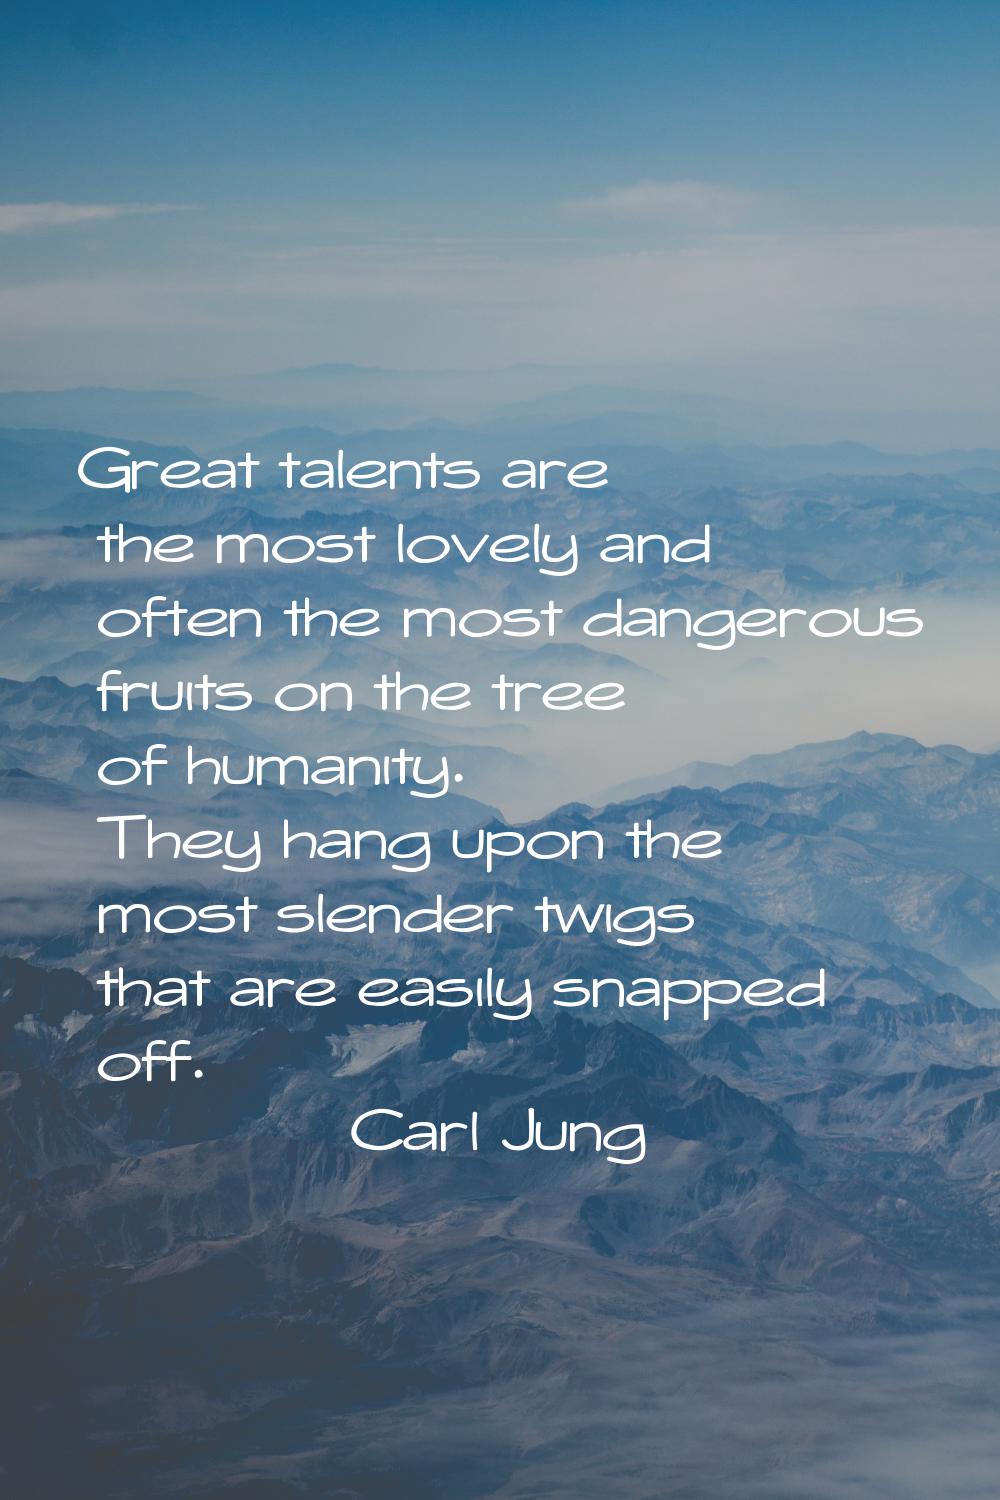 Great talents are the most lovely and often the most dangerous fruits on the tree of humanity. They